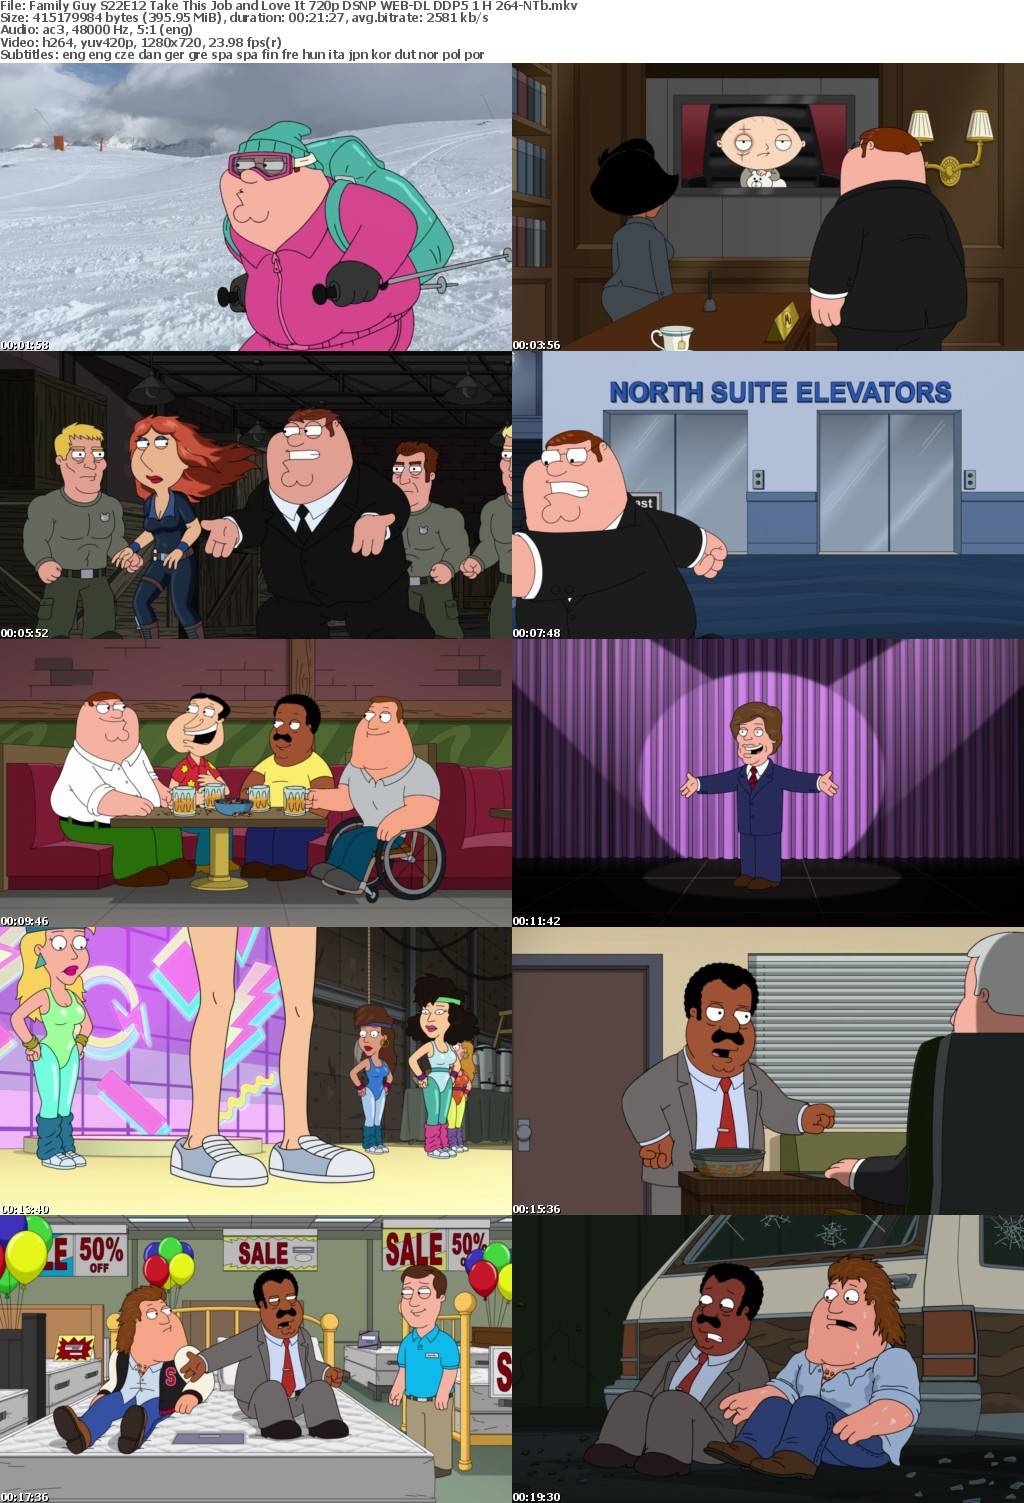 Family Guy S22E12 Take This Job and Love It 720p DSNP WEB-DL DDP5 1 H 264-NTb